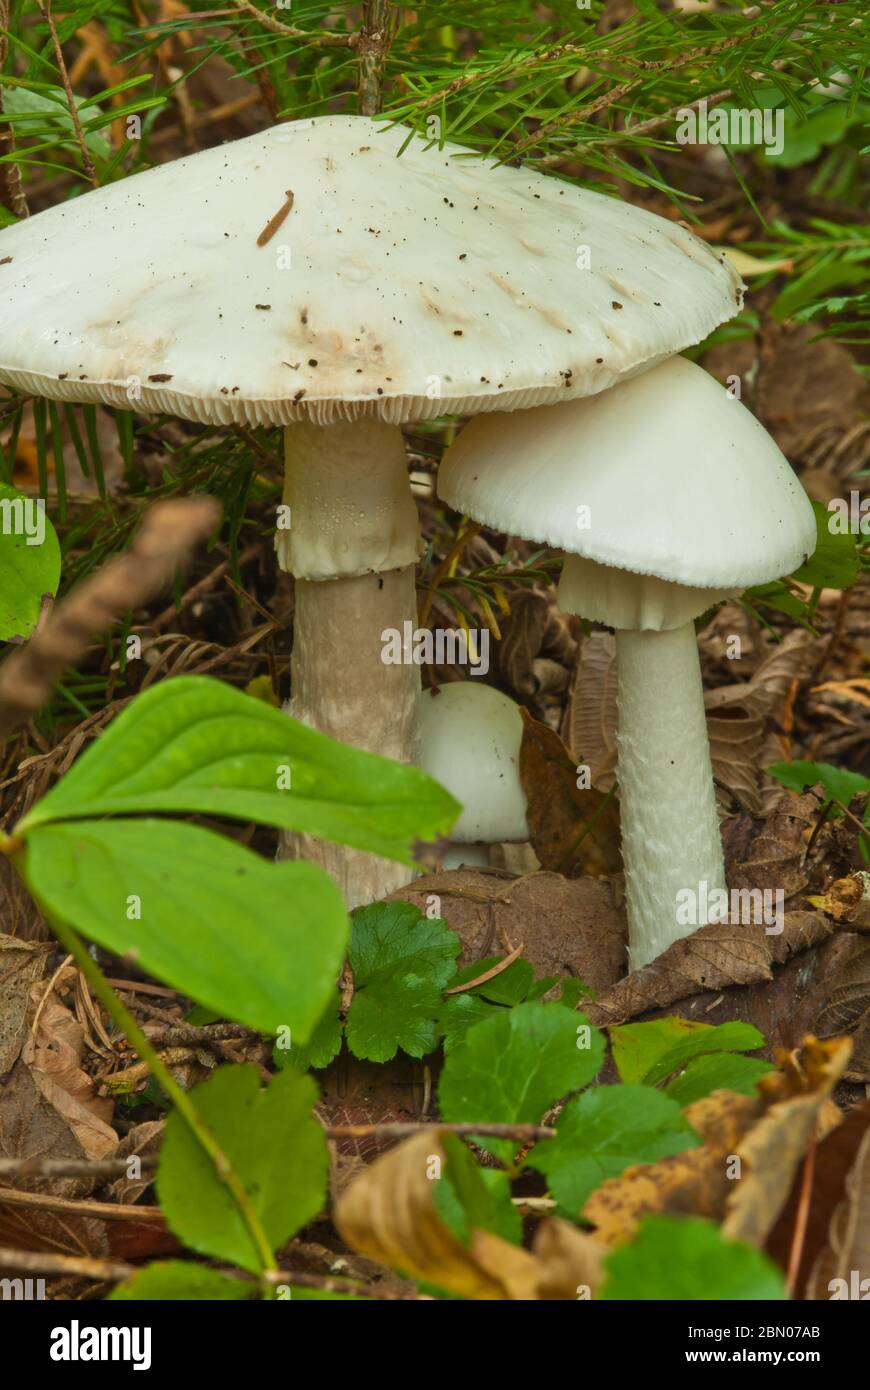 A pair of poisonous destroying angel mushrooms, Amanita virosa, growing in Algonquin Provincial Park in Ontario, Canada Stock Photo